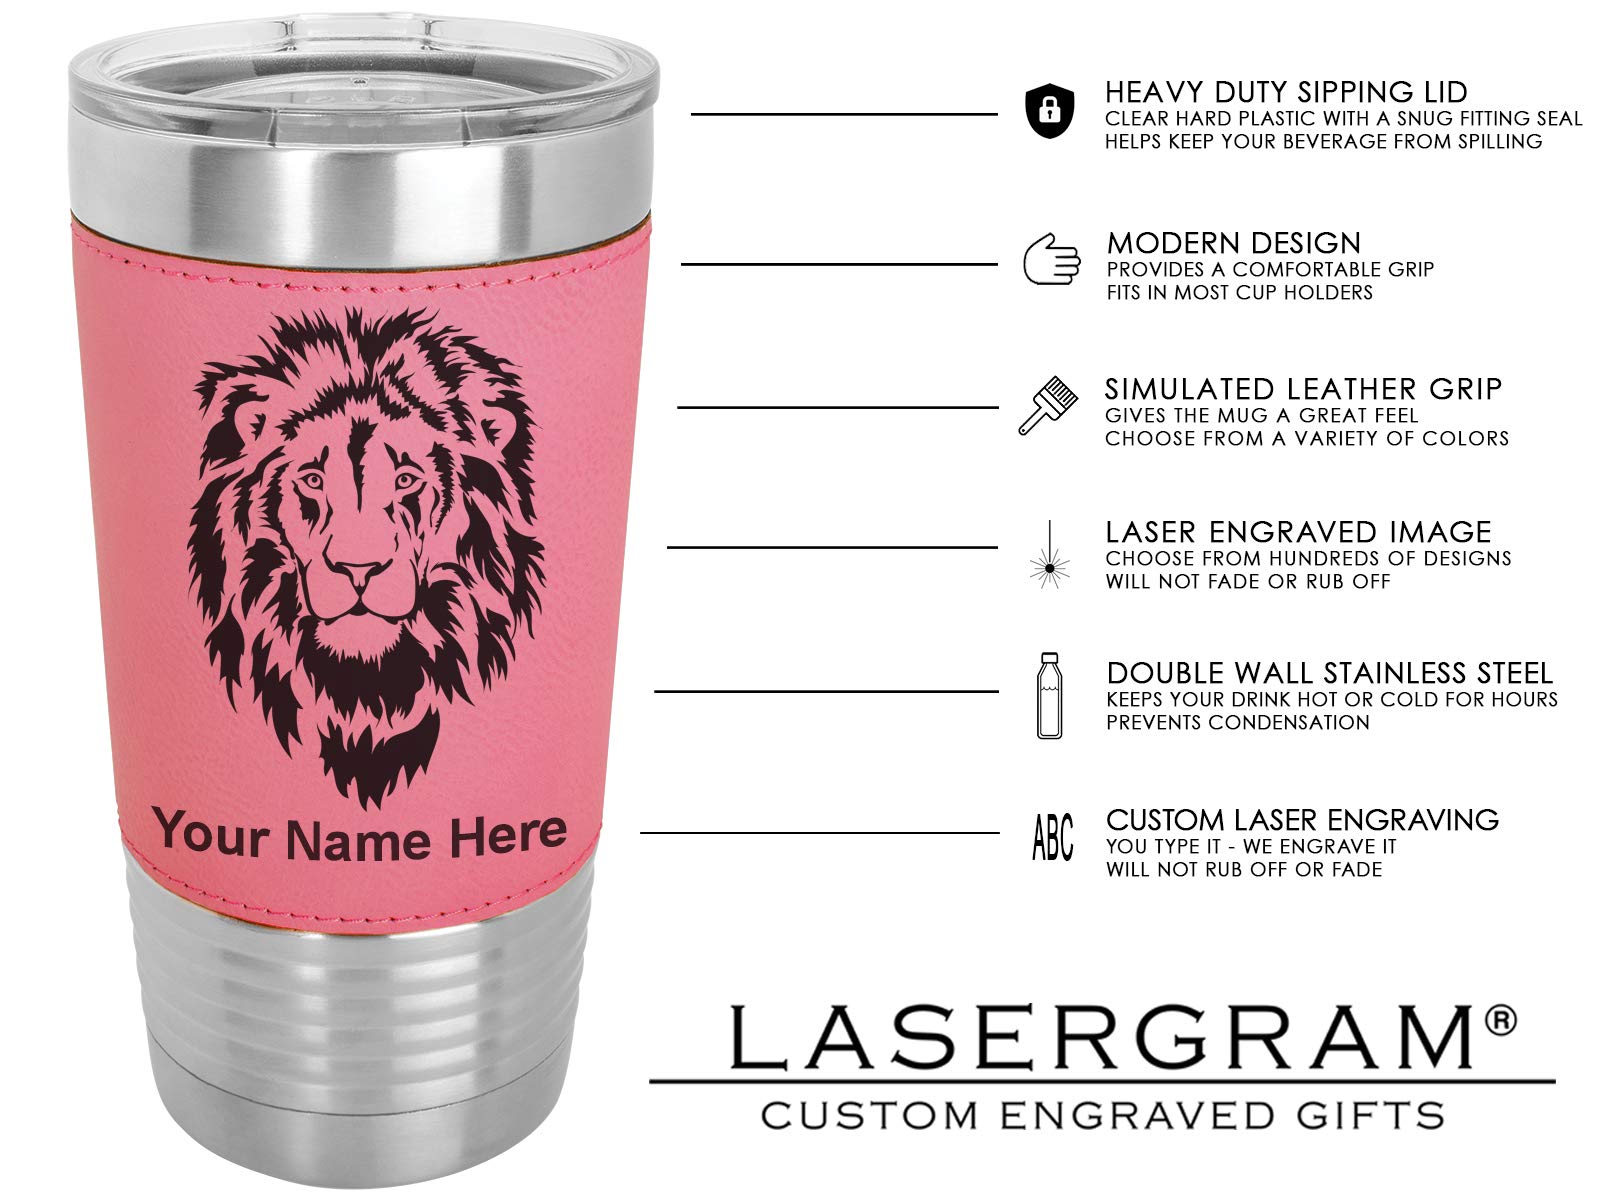 LaserGram 20oz Vacuum Insulated Tumbler Mug, Barber Shop Pole, Personalized Engraving Included (Faux Leather, Pink)